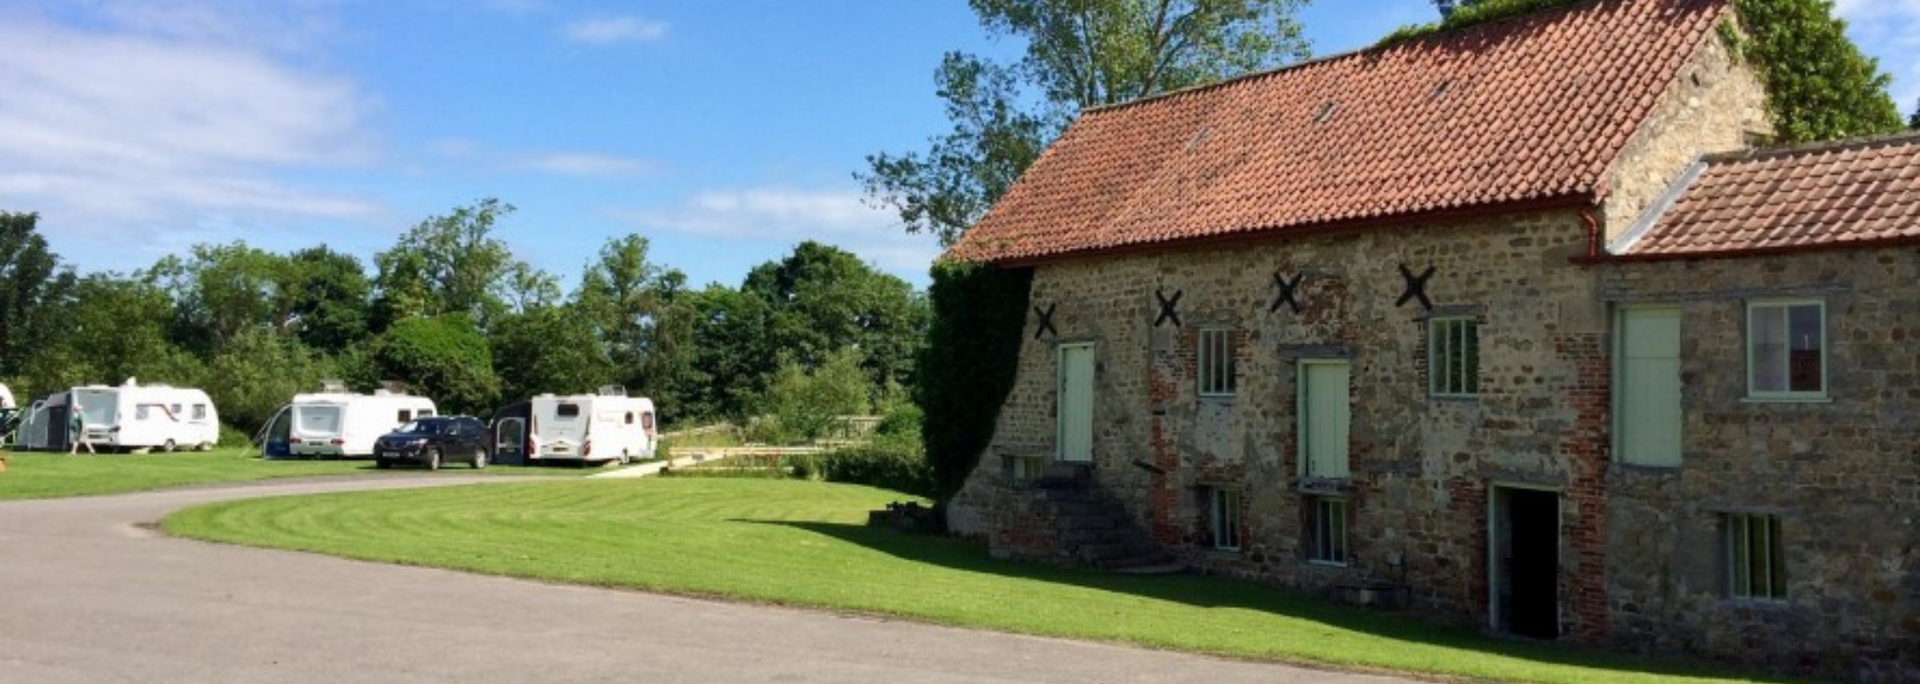 Picture of Sleningford Watermill Caravan and Camping Park.